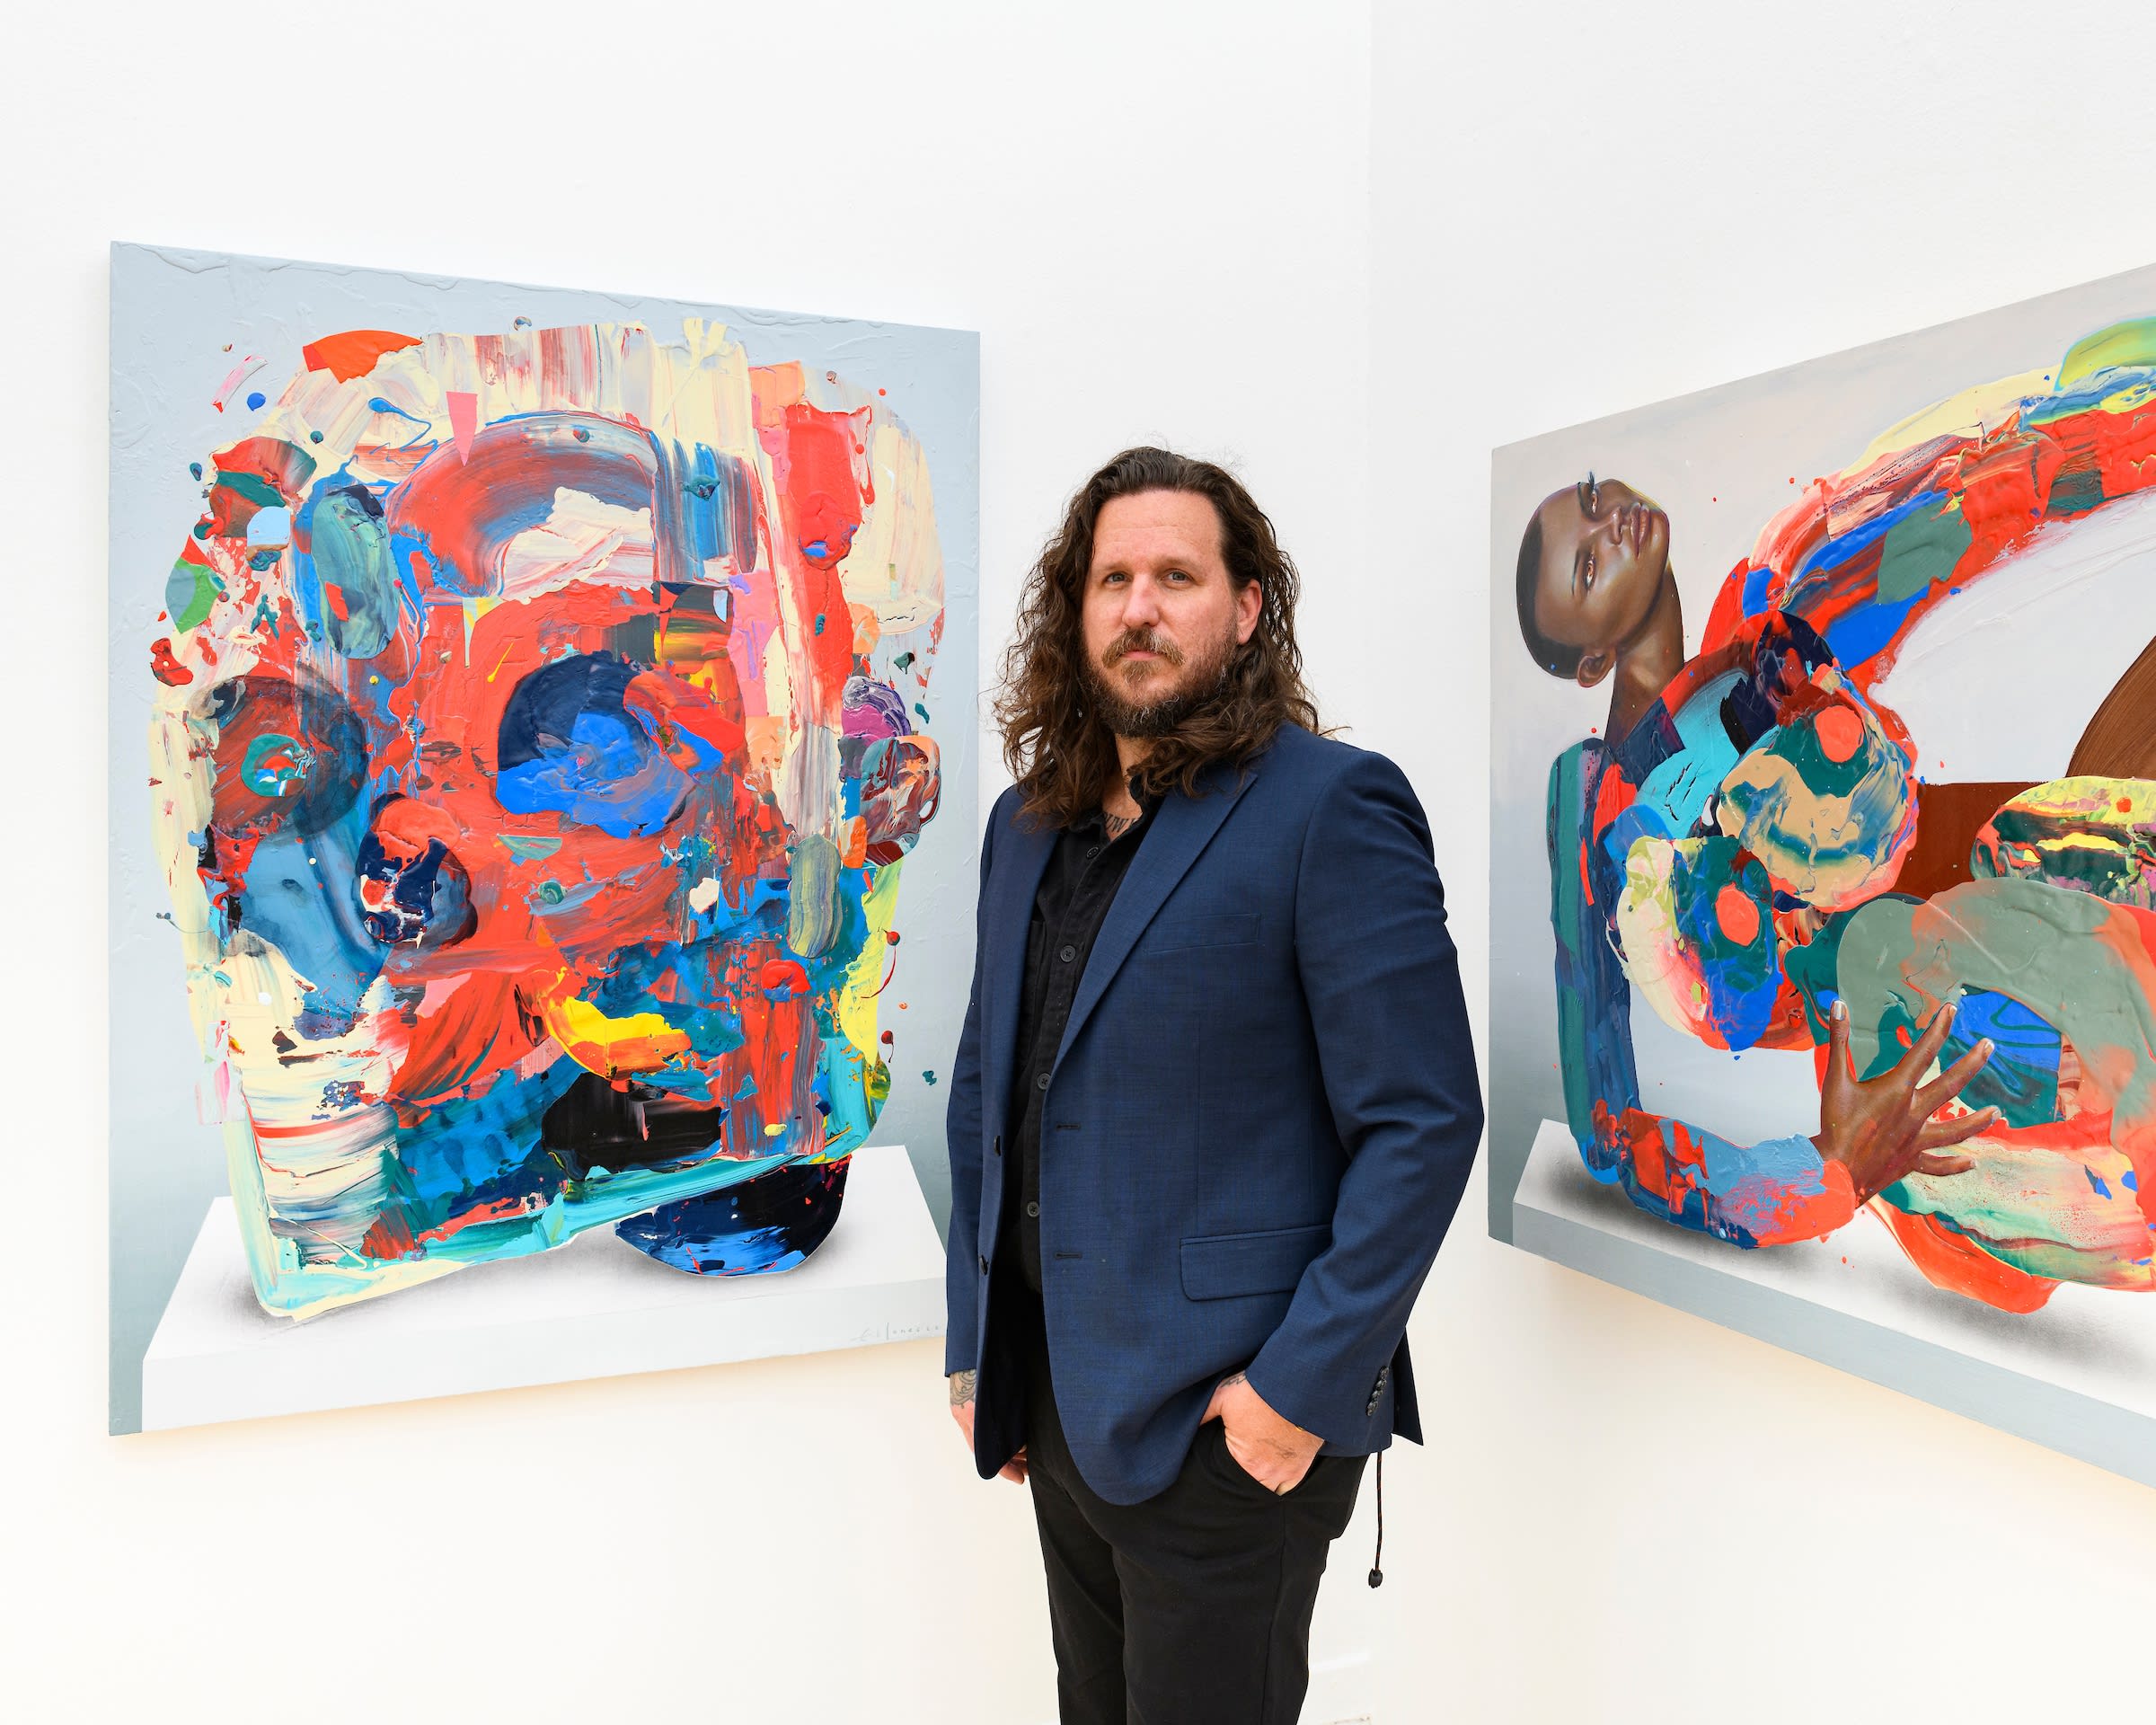 Erik Jones at his solo show standing infront of two pieces 